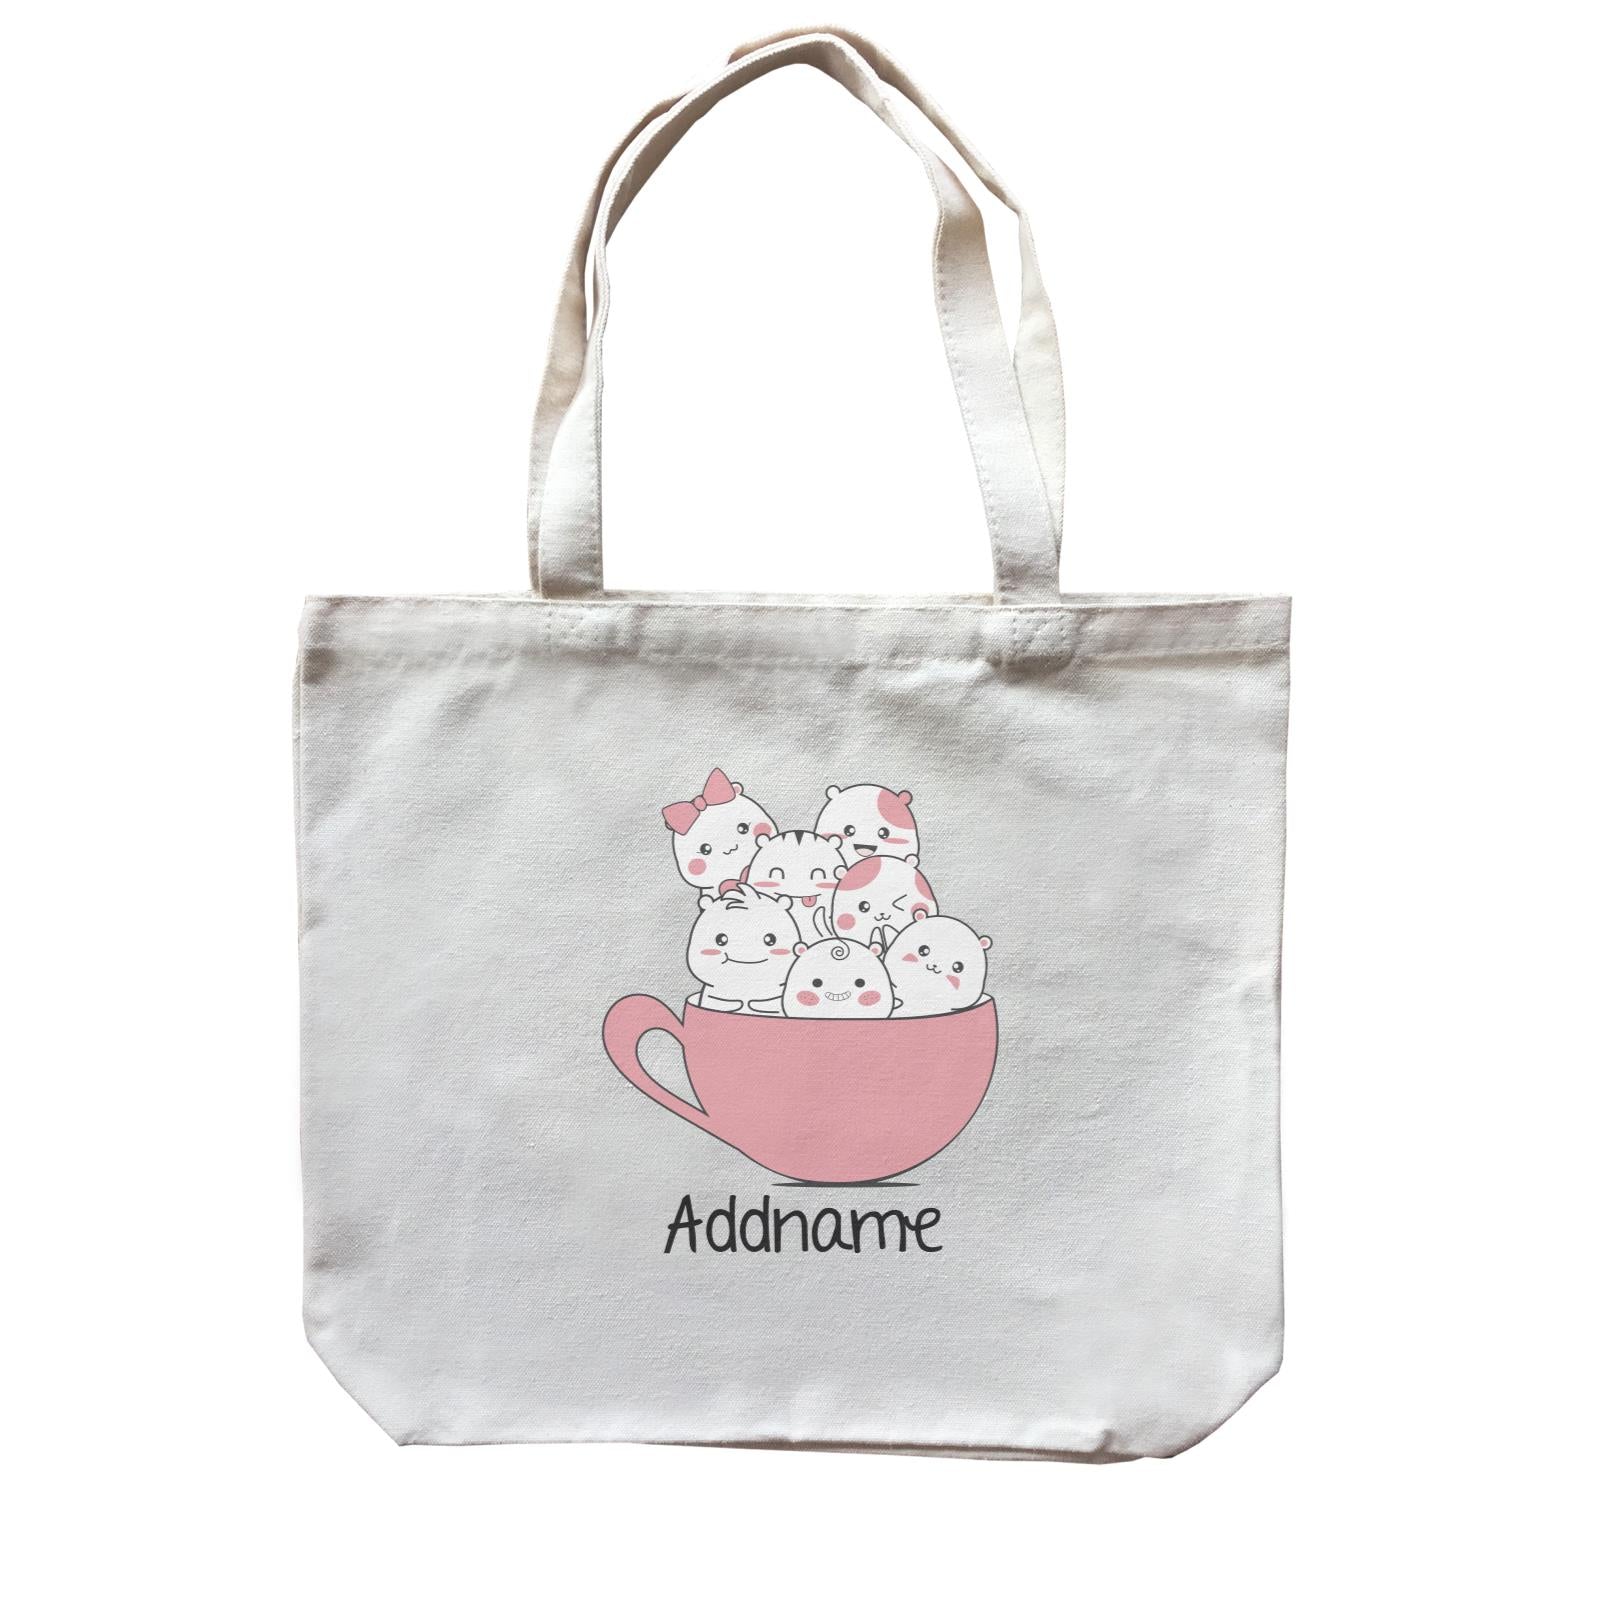 Cute Animals And Friends Series Cute Hamster Group Coffee Cup Addname Canvas Bag